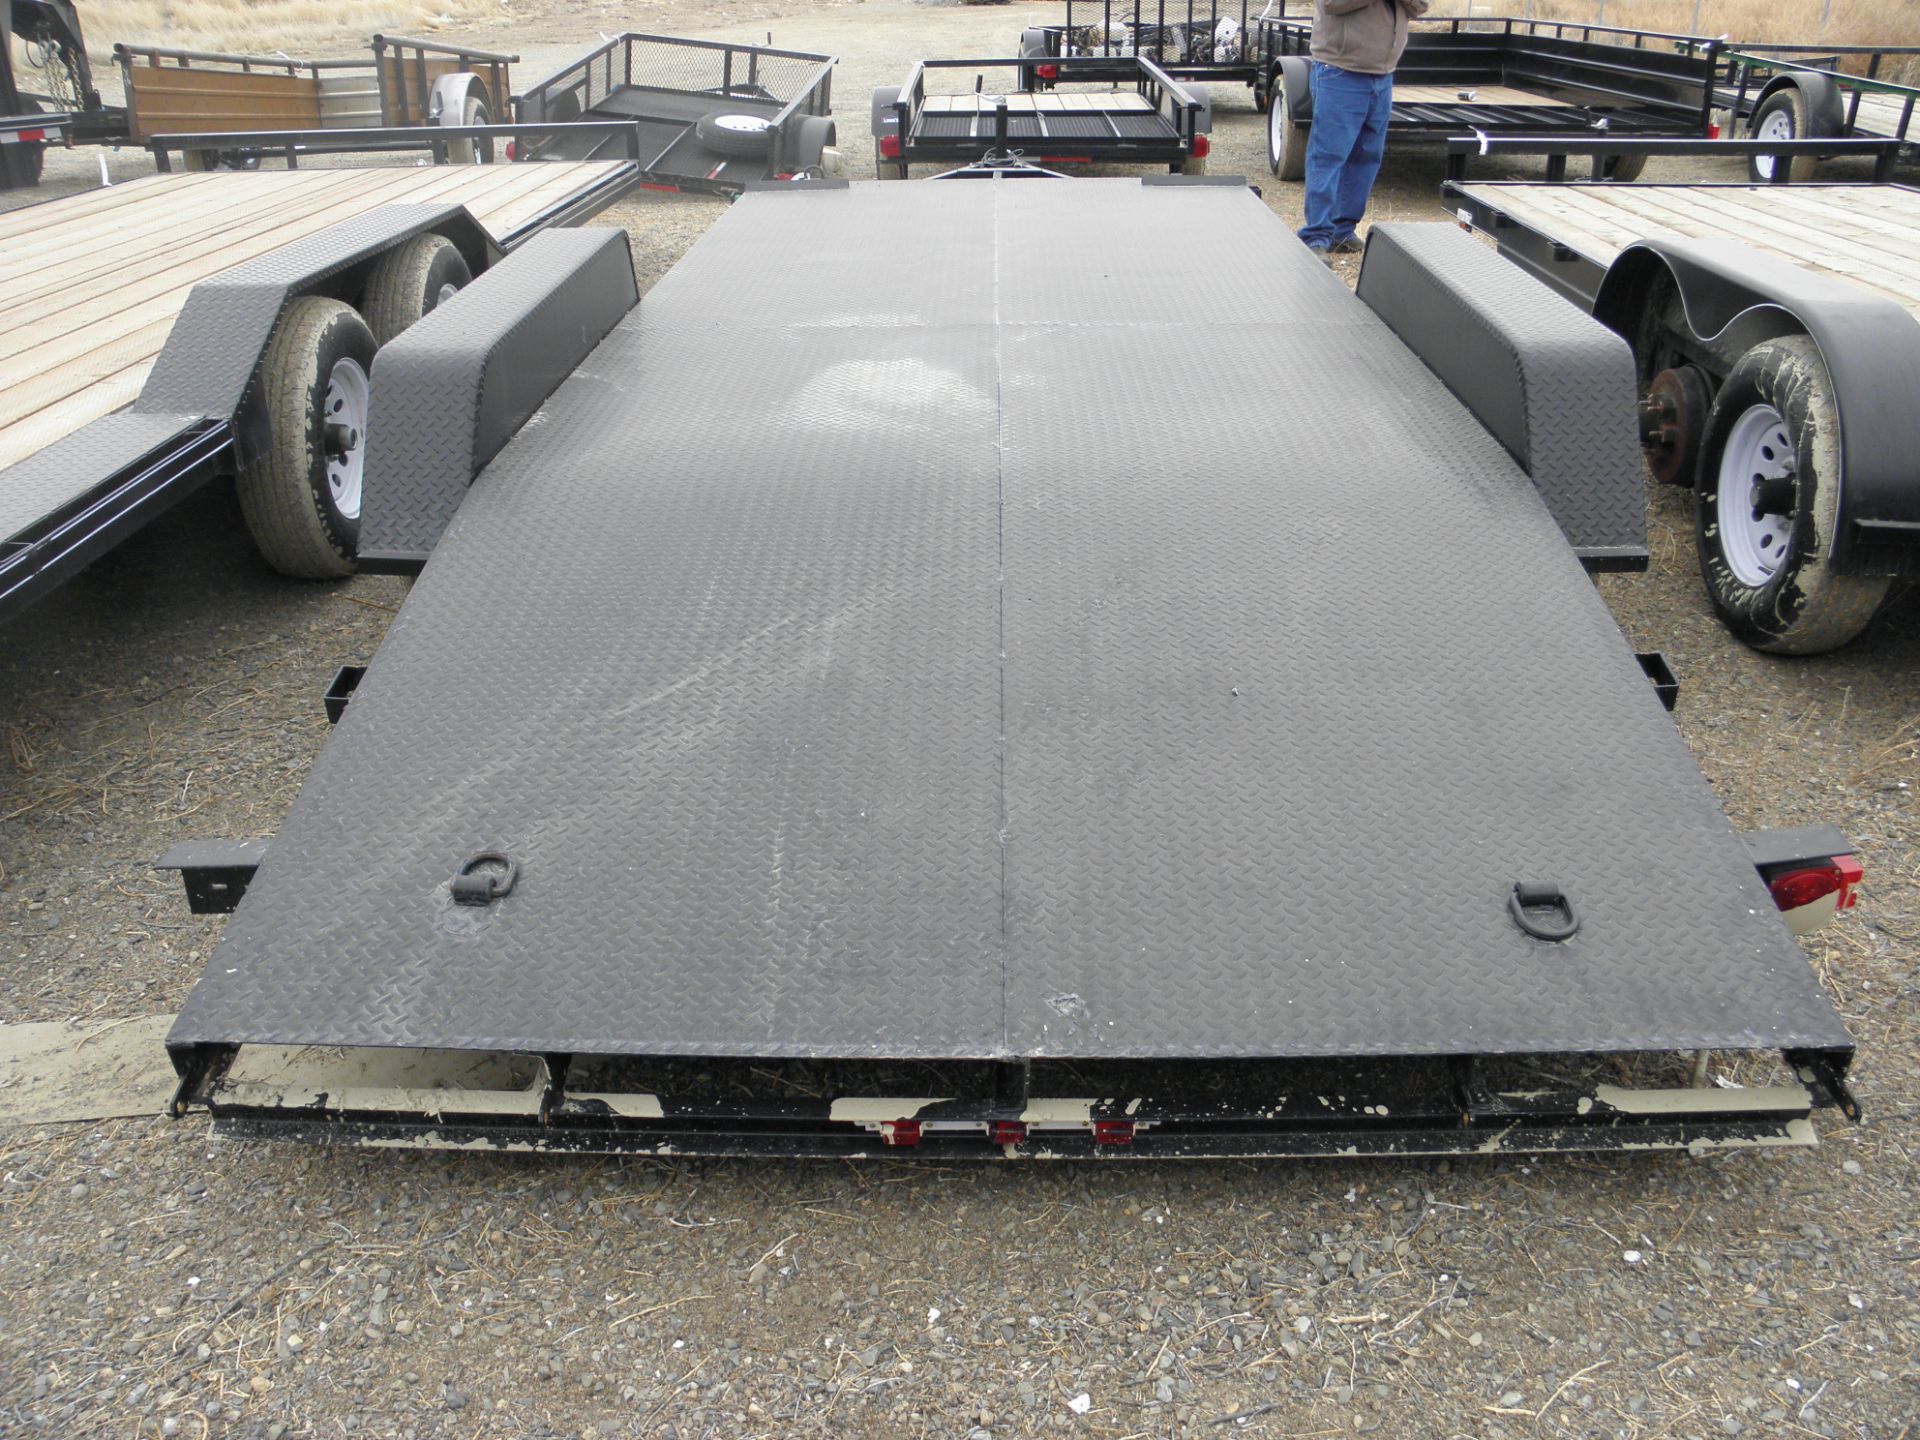 2015 7' X 18' tandem axle flatbed diamond plate deck w/beaver tail - Image 2 of 3